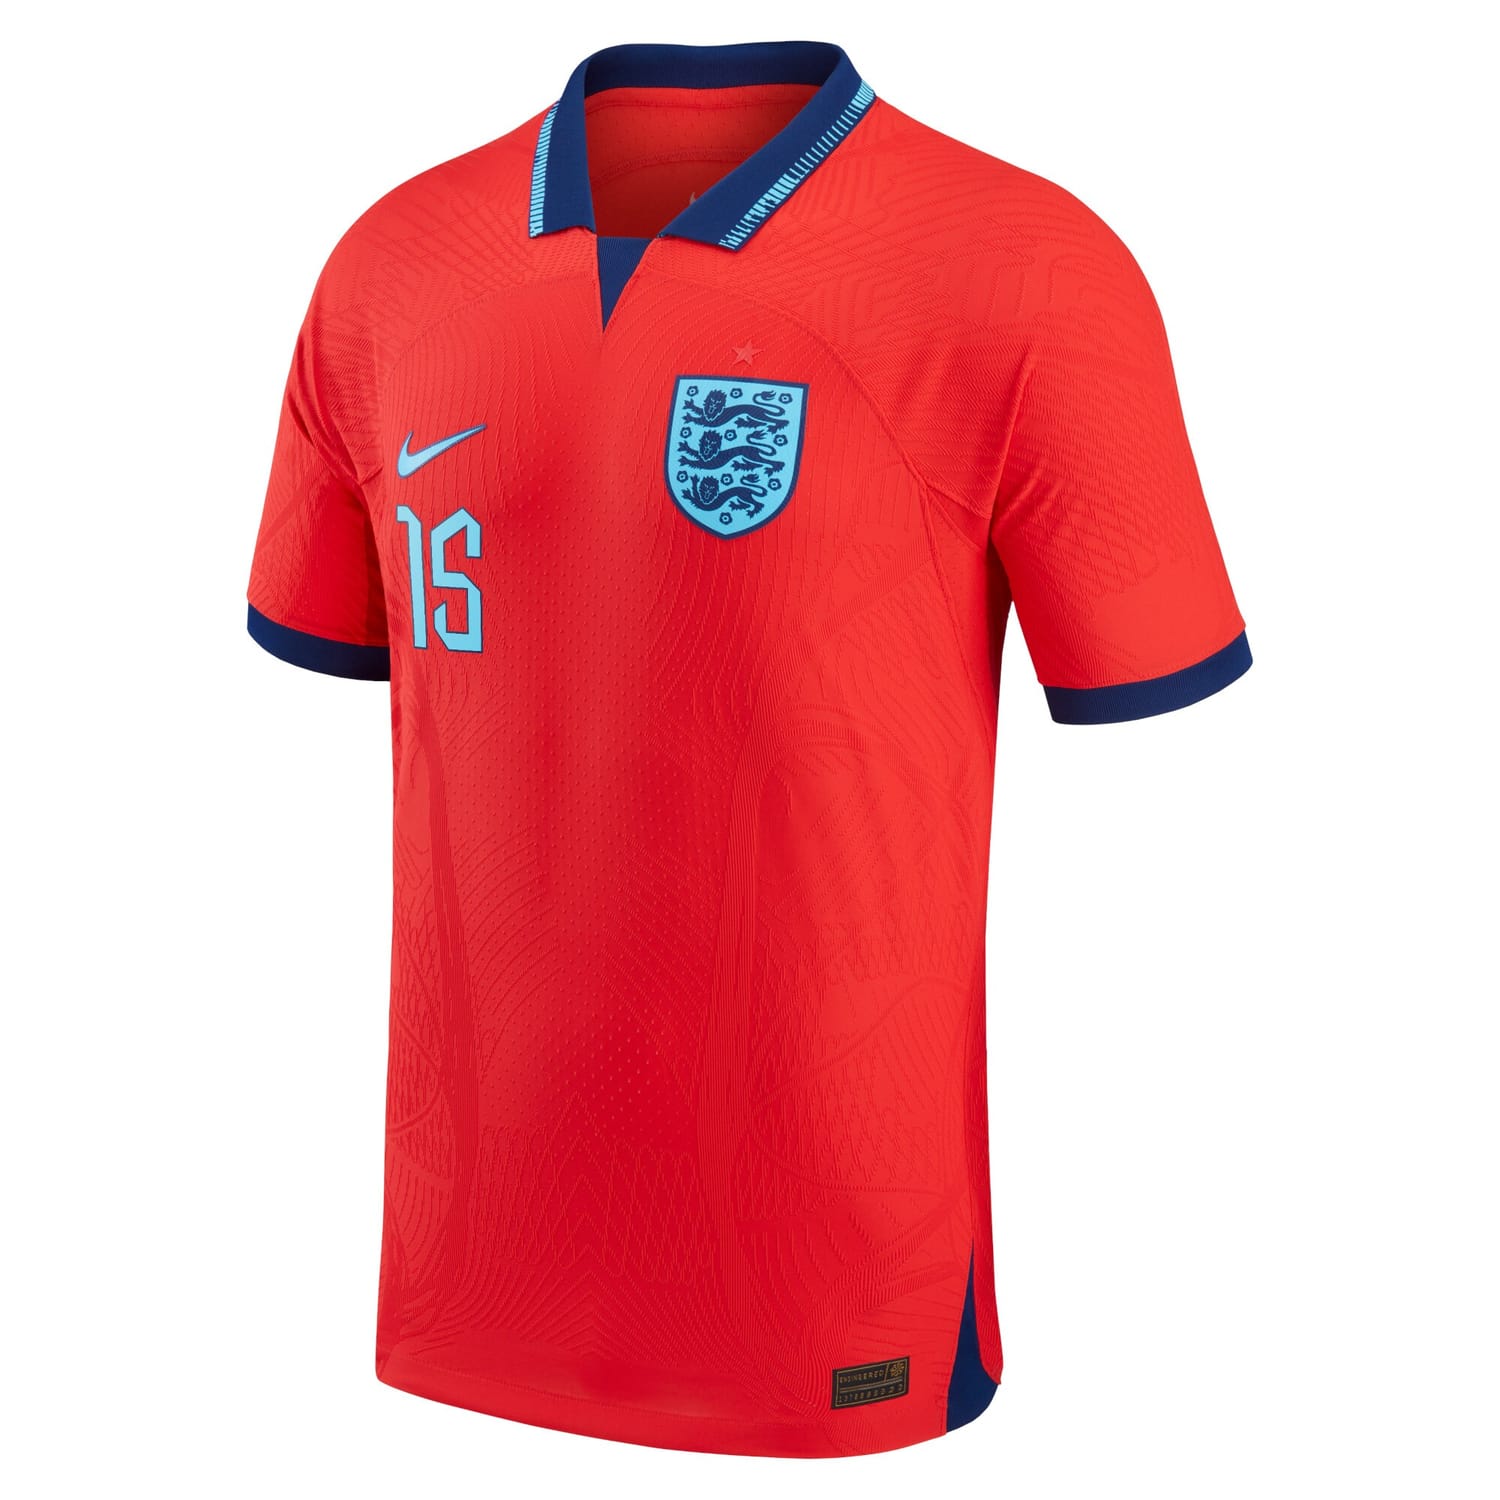 England National Team Away Authentic Jersey Shirt 2022 player Eric Dier 15 printing for Men